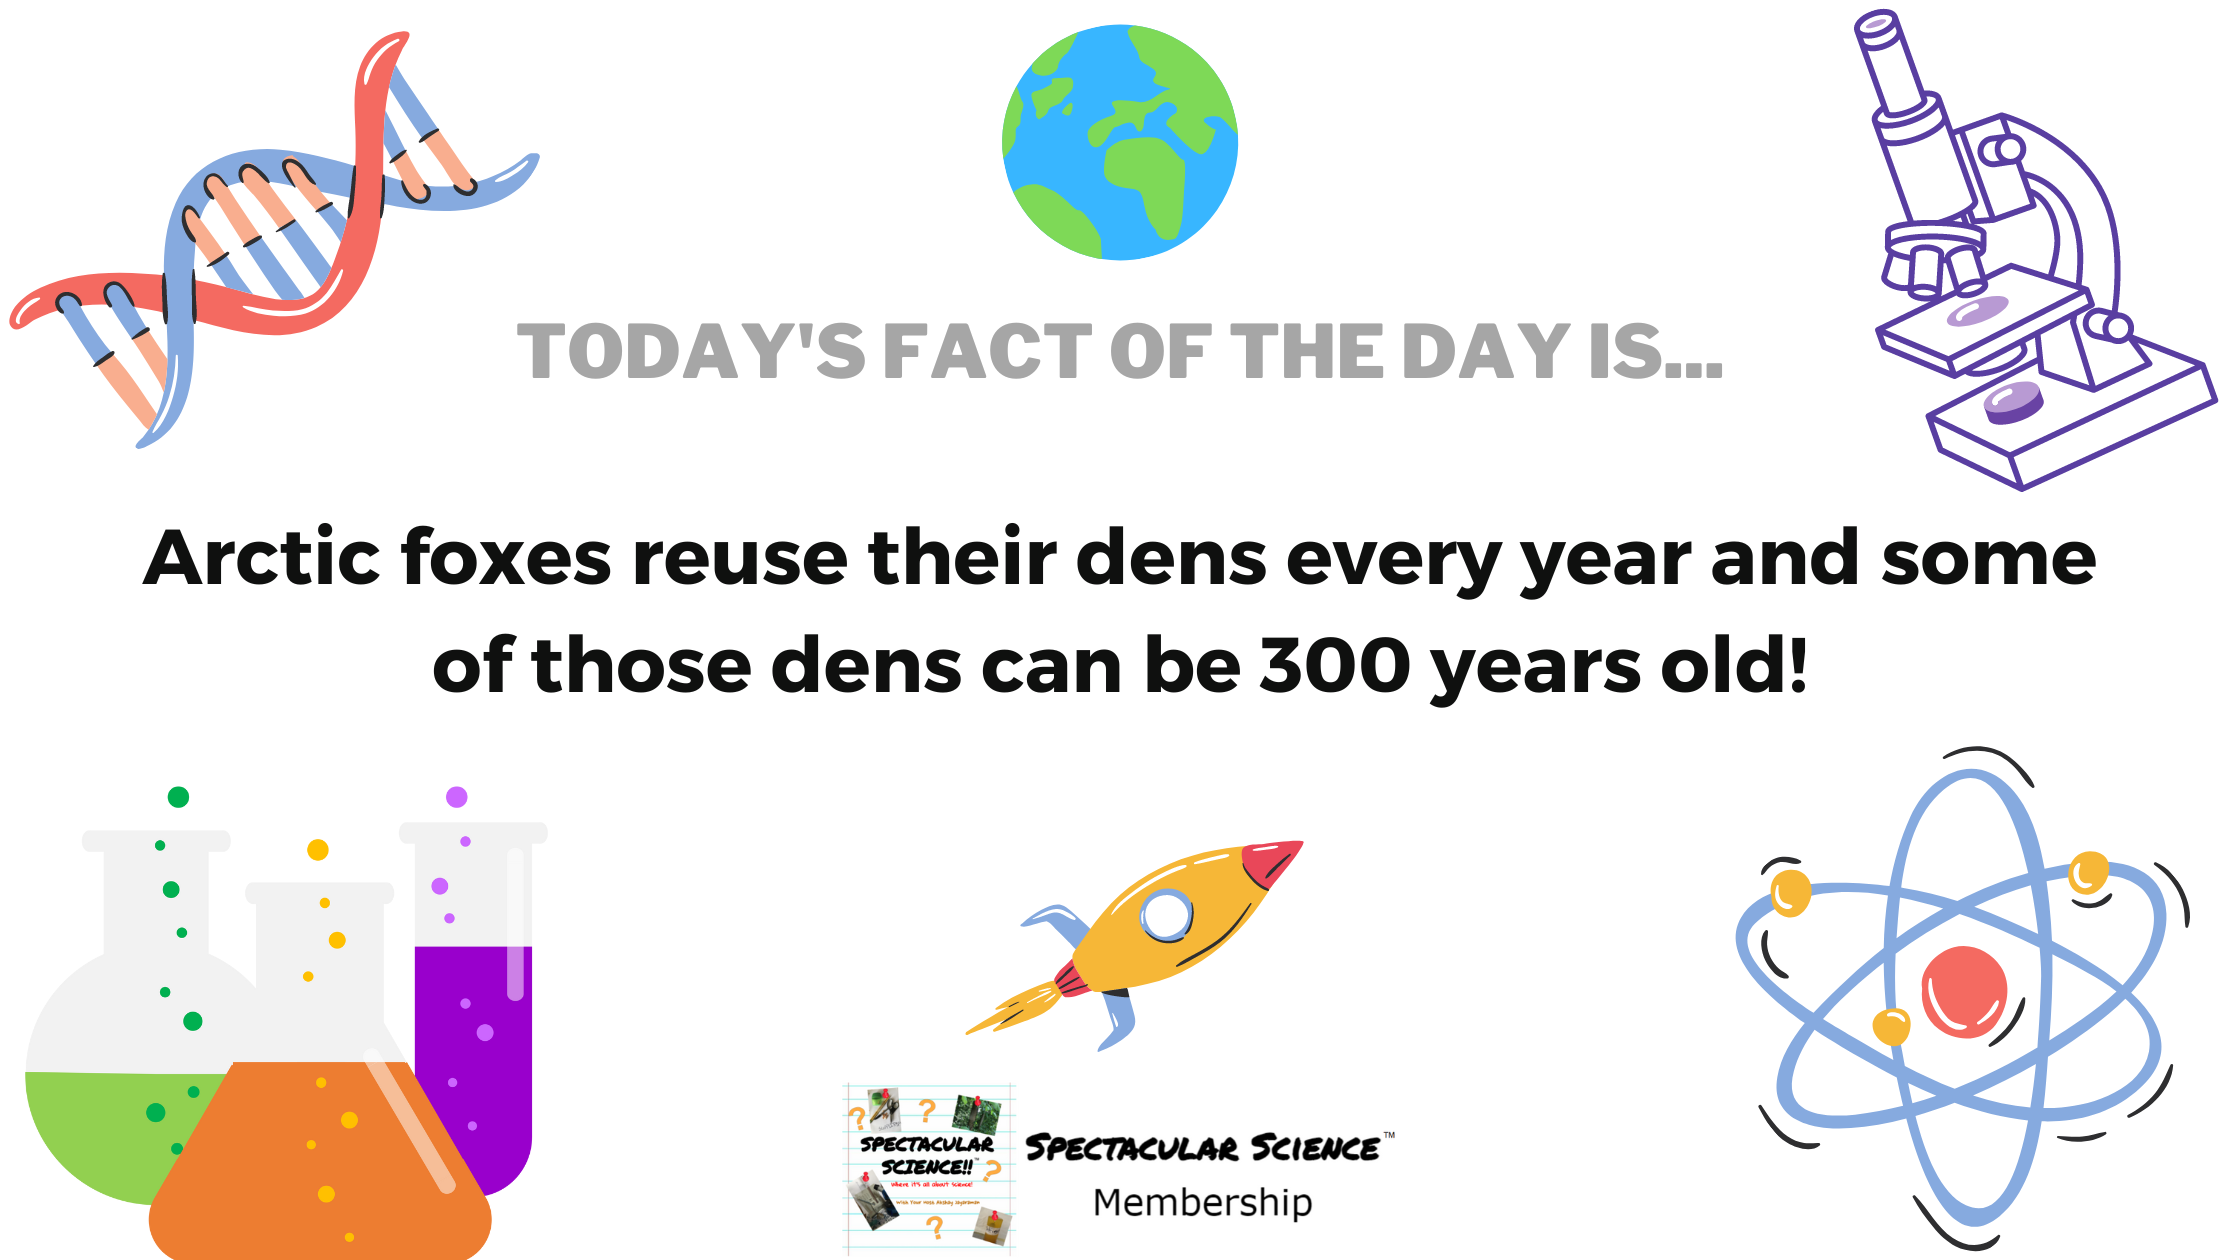 Fact of the Day Image August 23rd